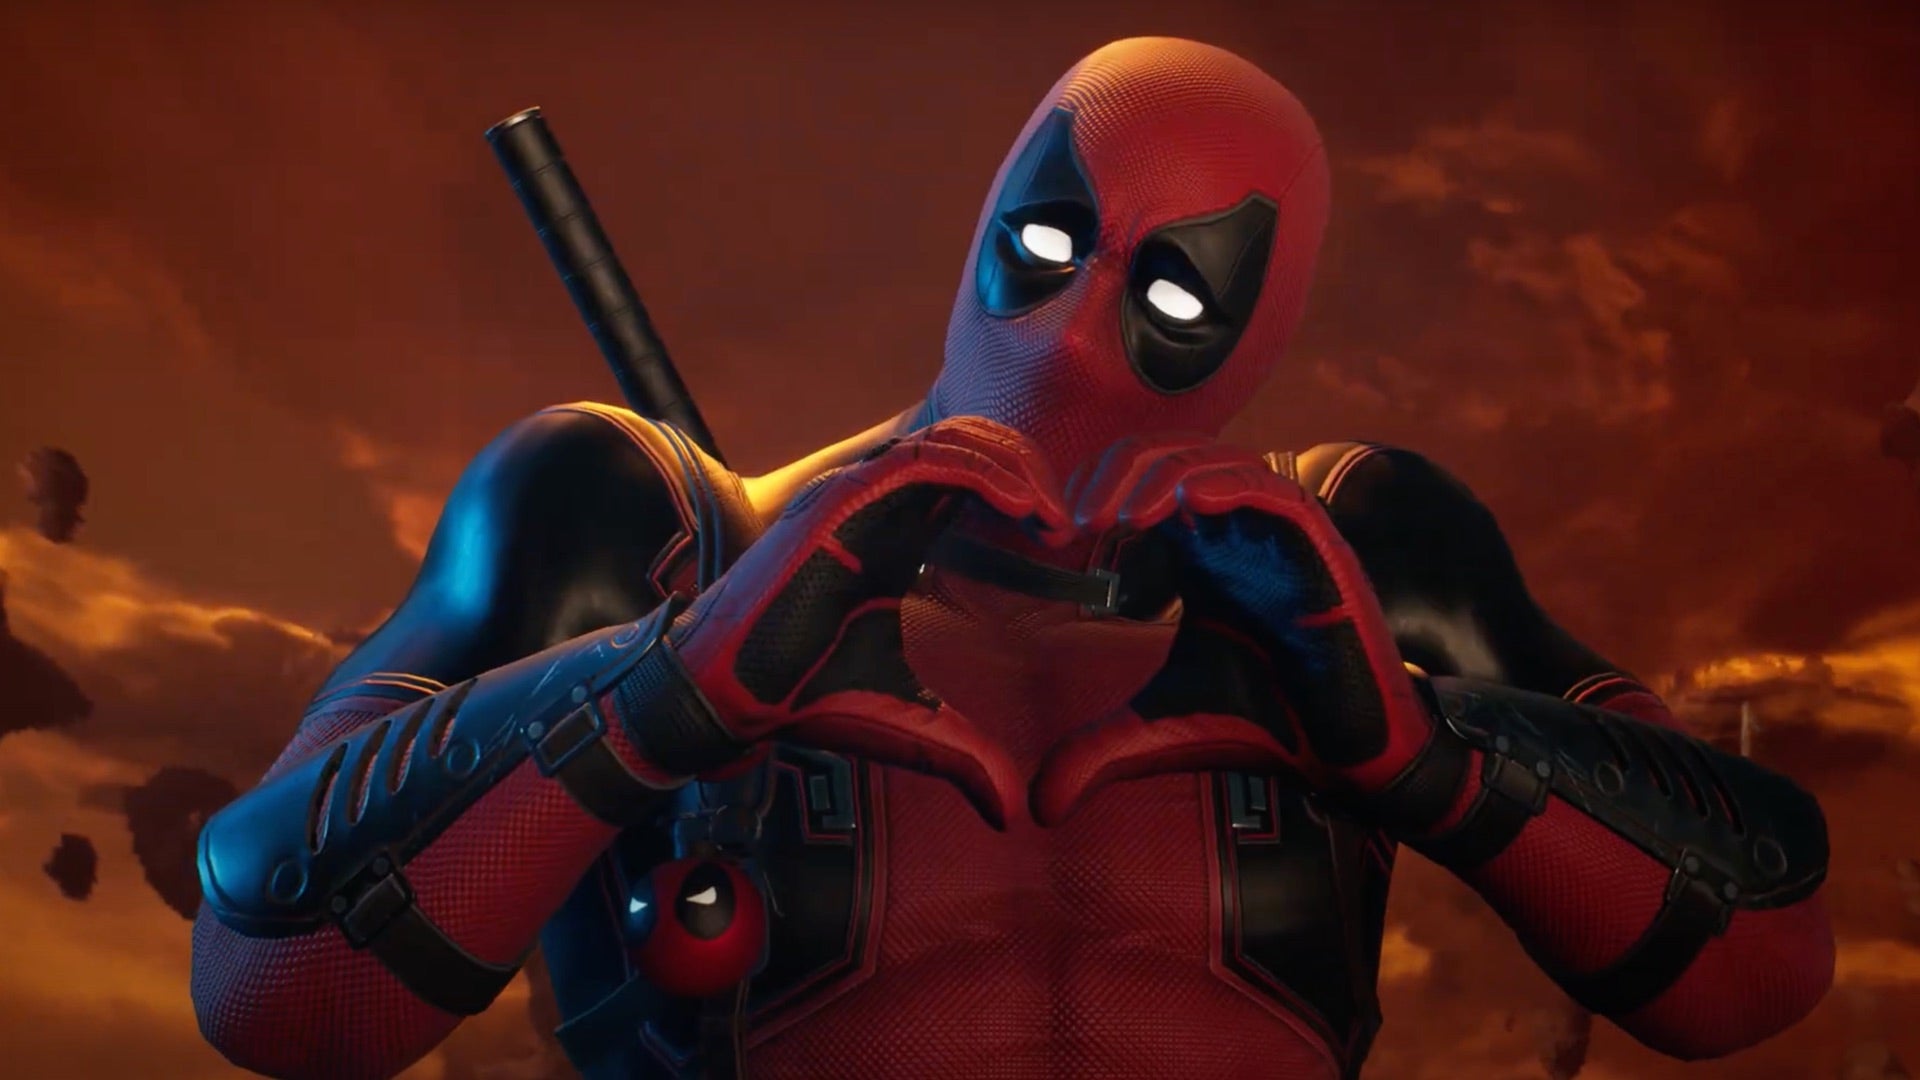 Image for Marvel's Midnight Suns' Deadpool DLC gets January release date, new trailer